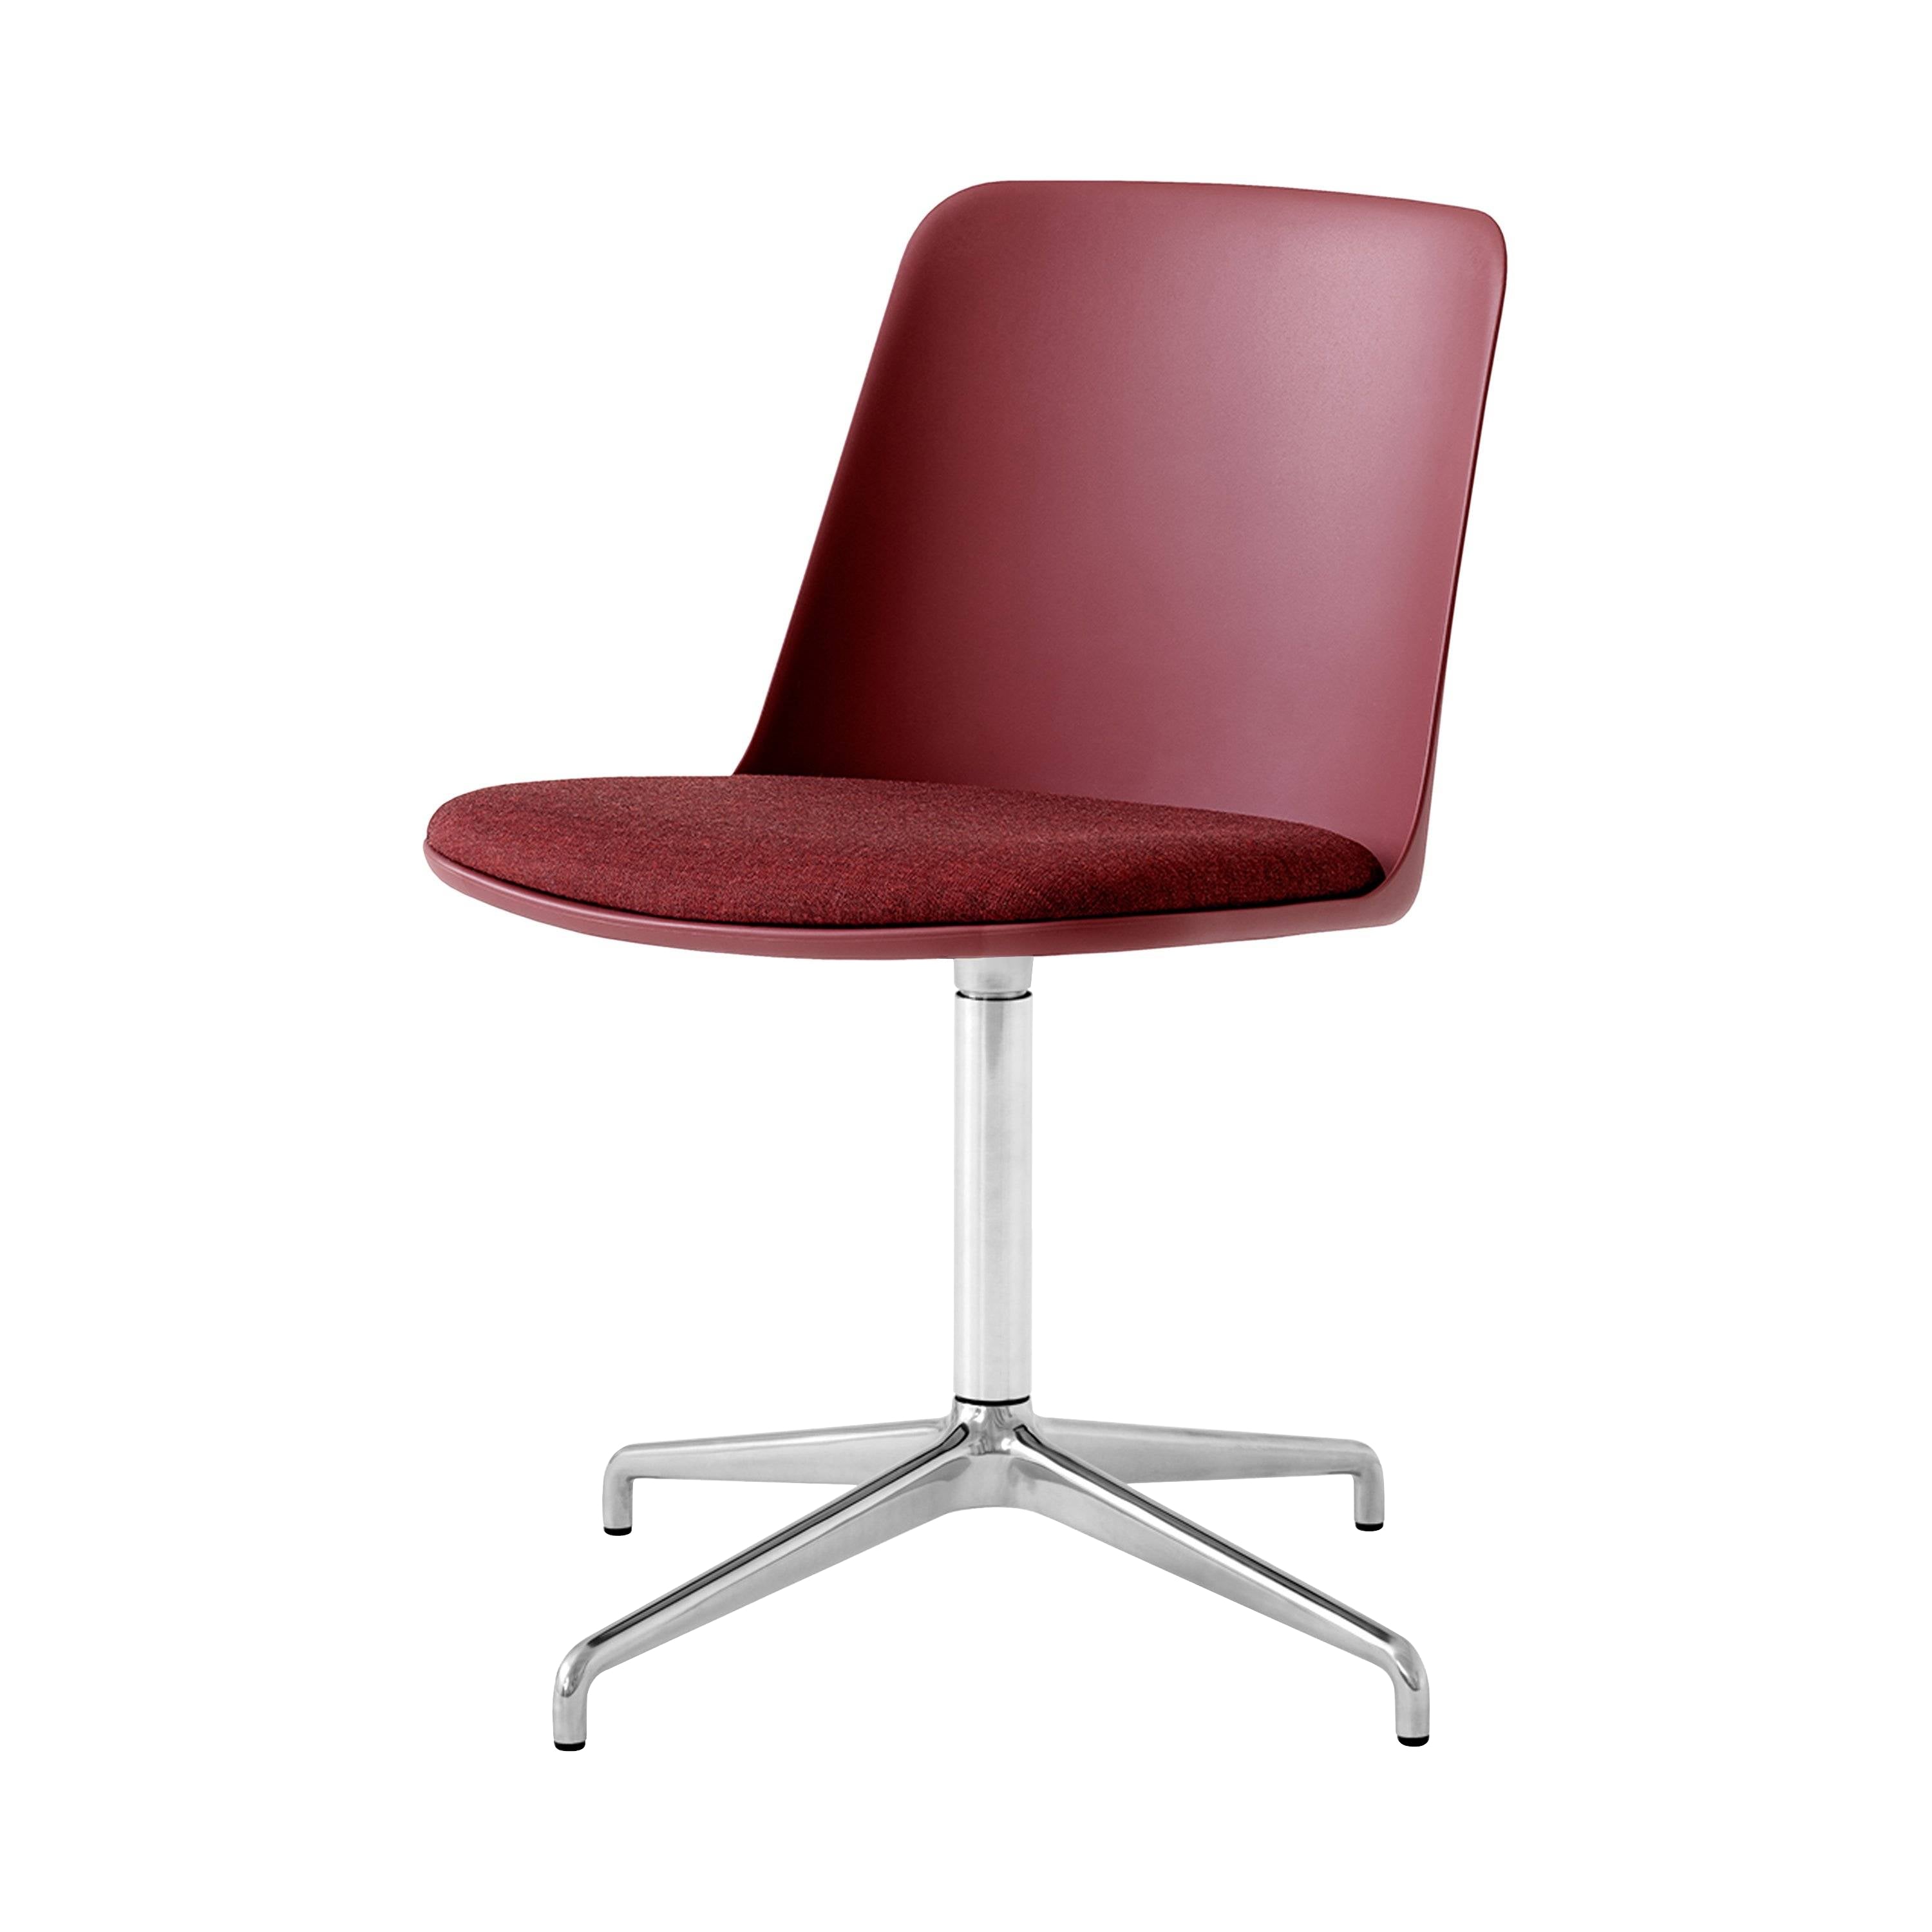 Rely Chair HW12: Polished Aluminum + Red Brown